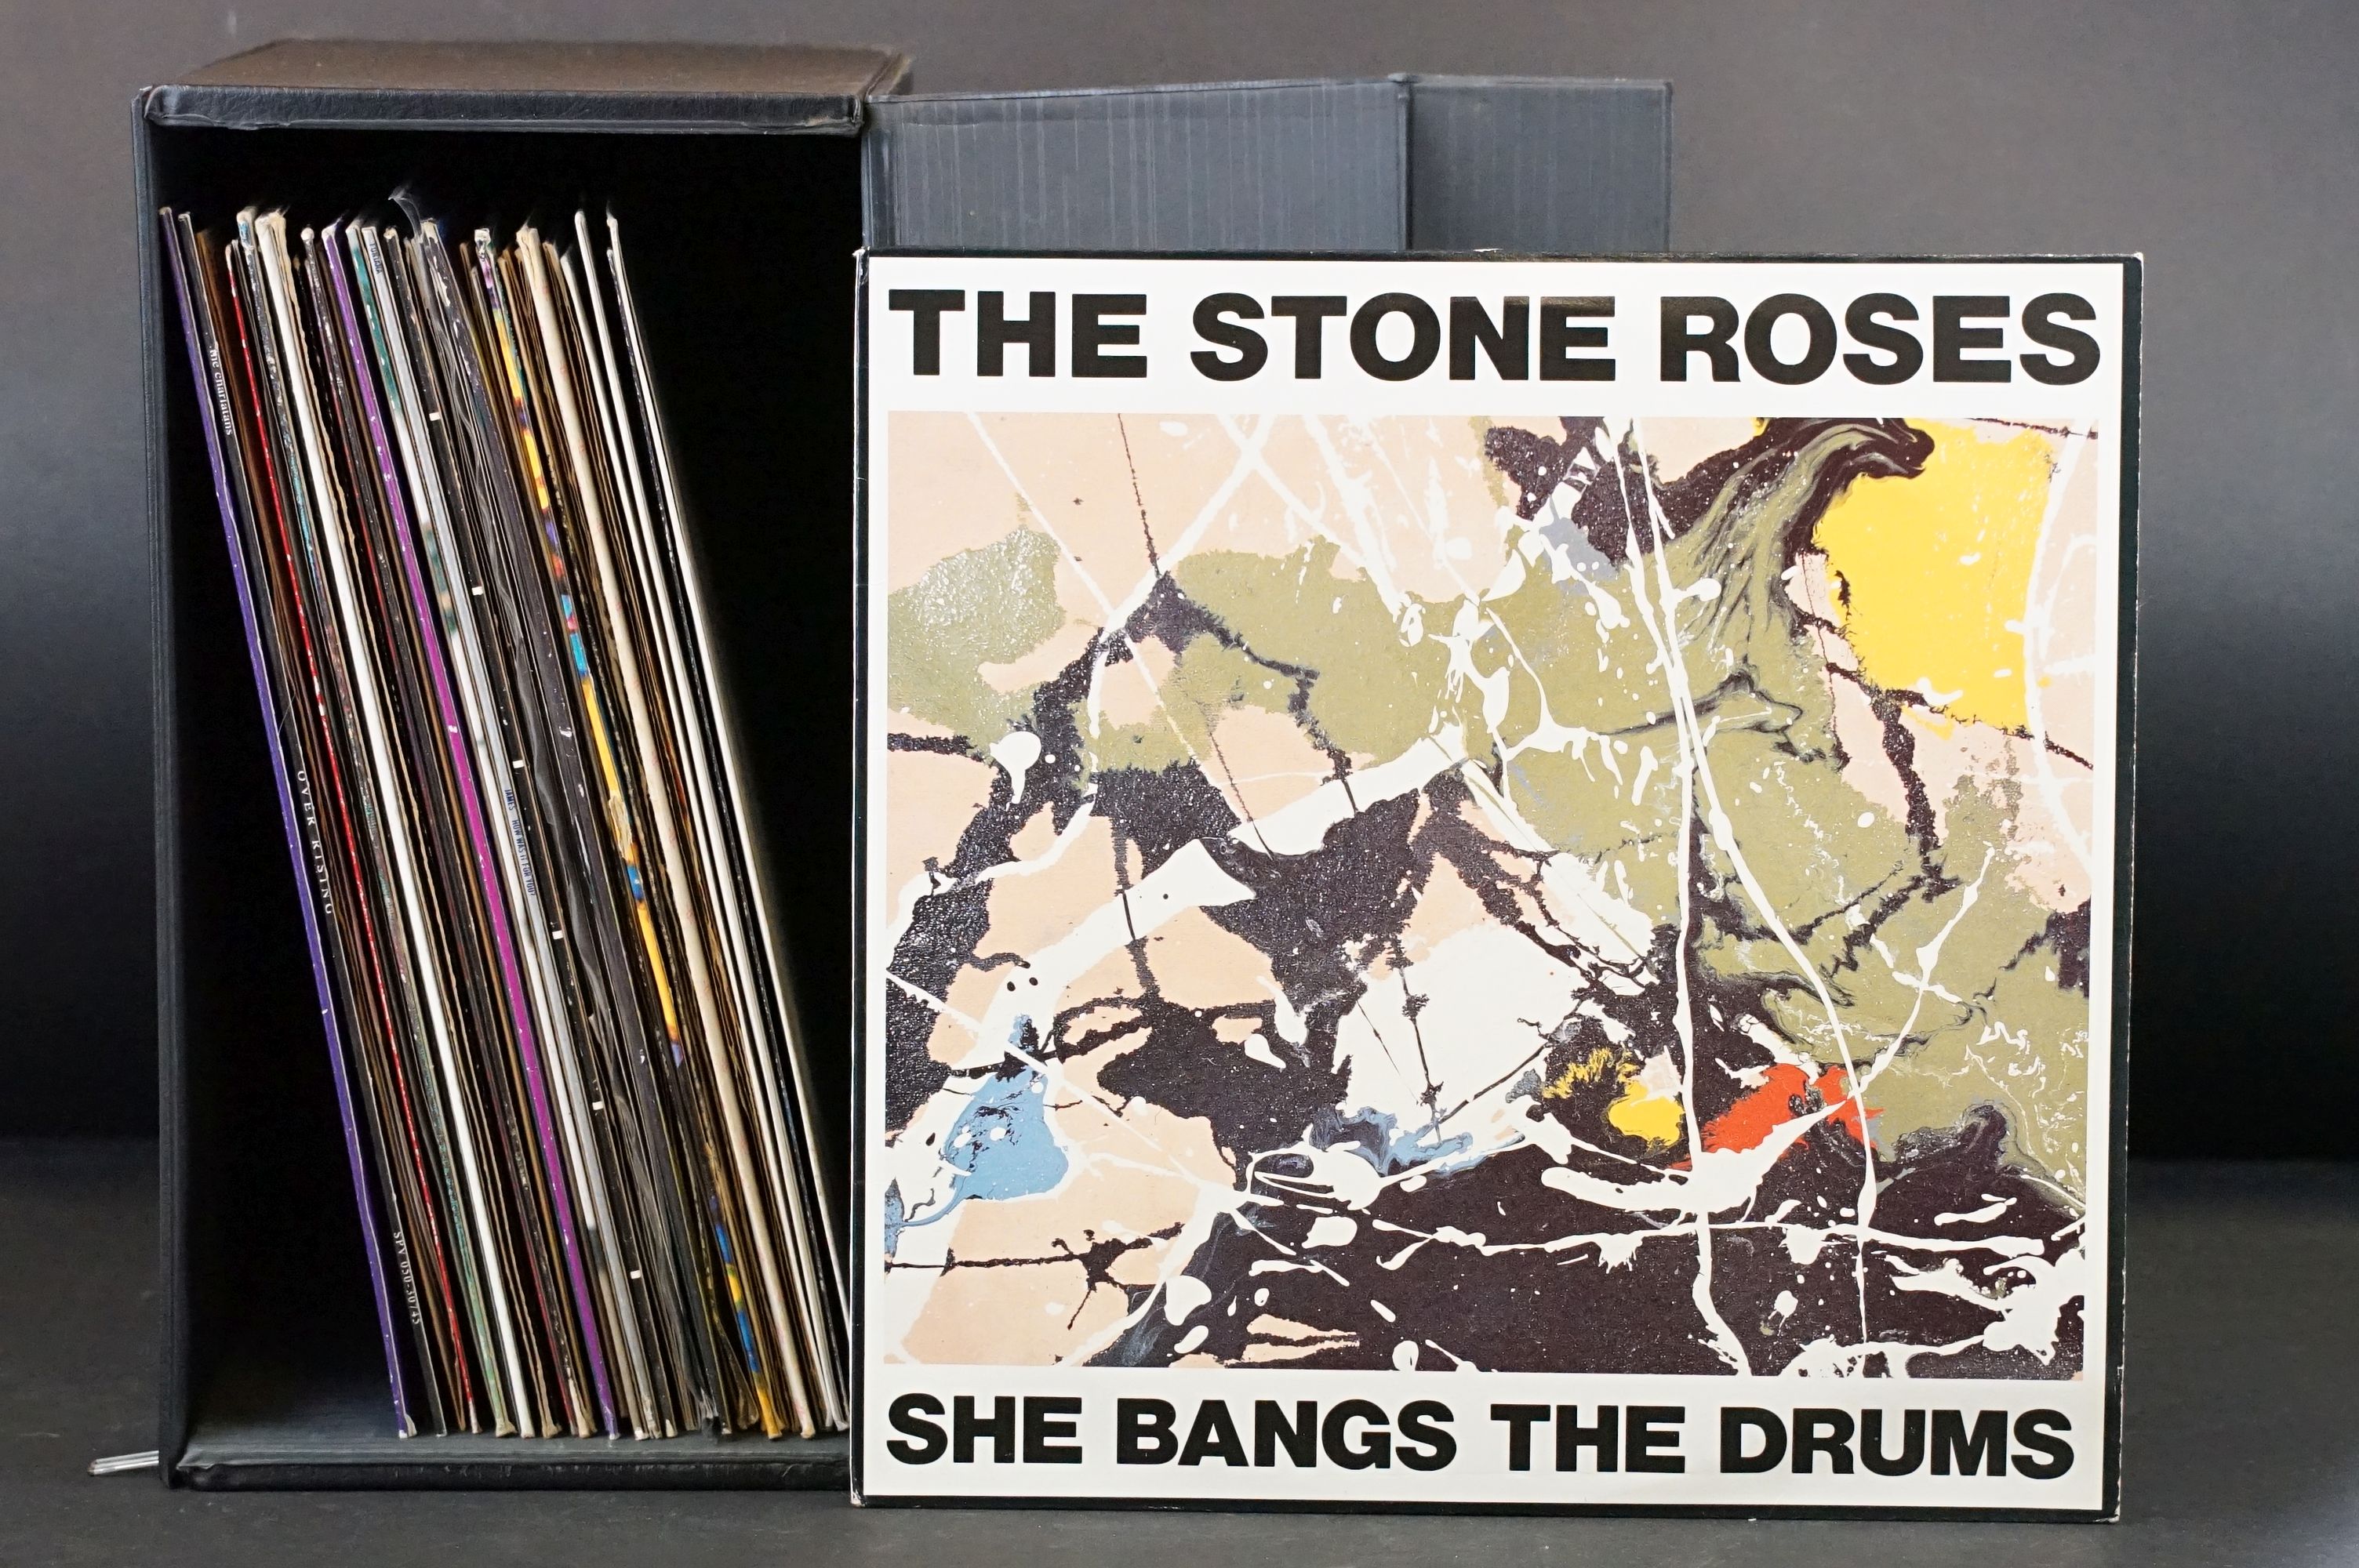 Vinyl - 41 12" singles to include The Stone Roses, Ride, The Charlatans, Echobelly, Shed 7, Velvet